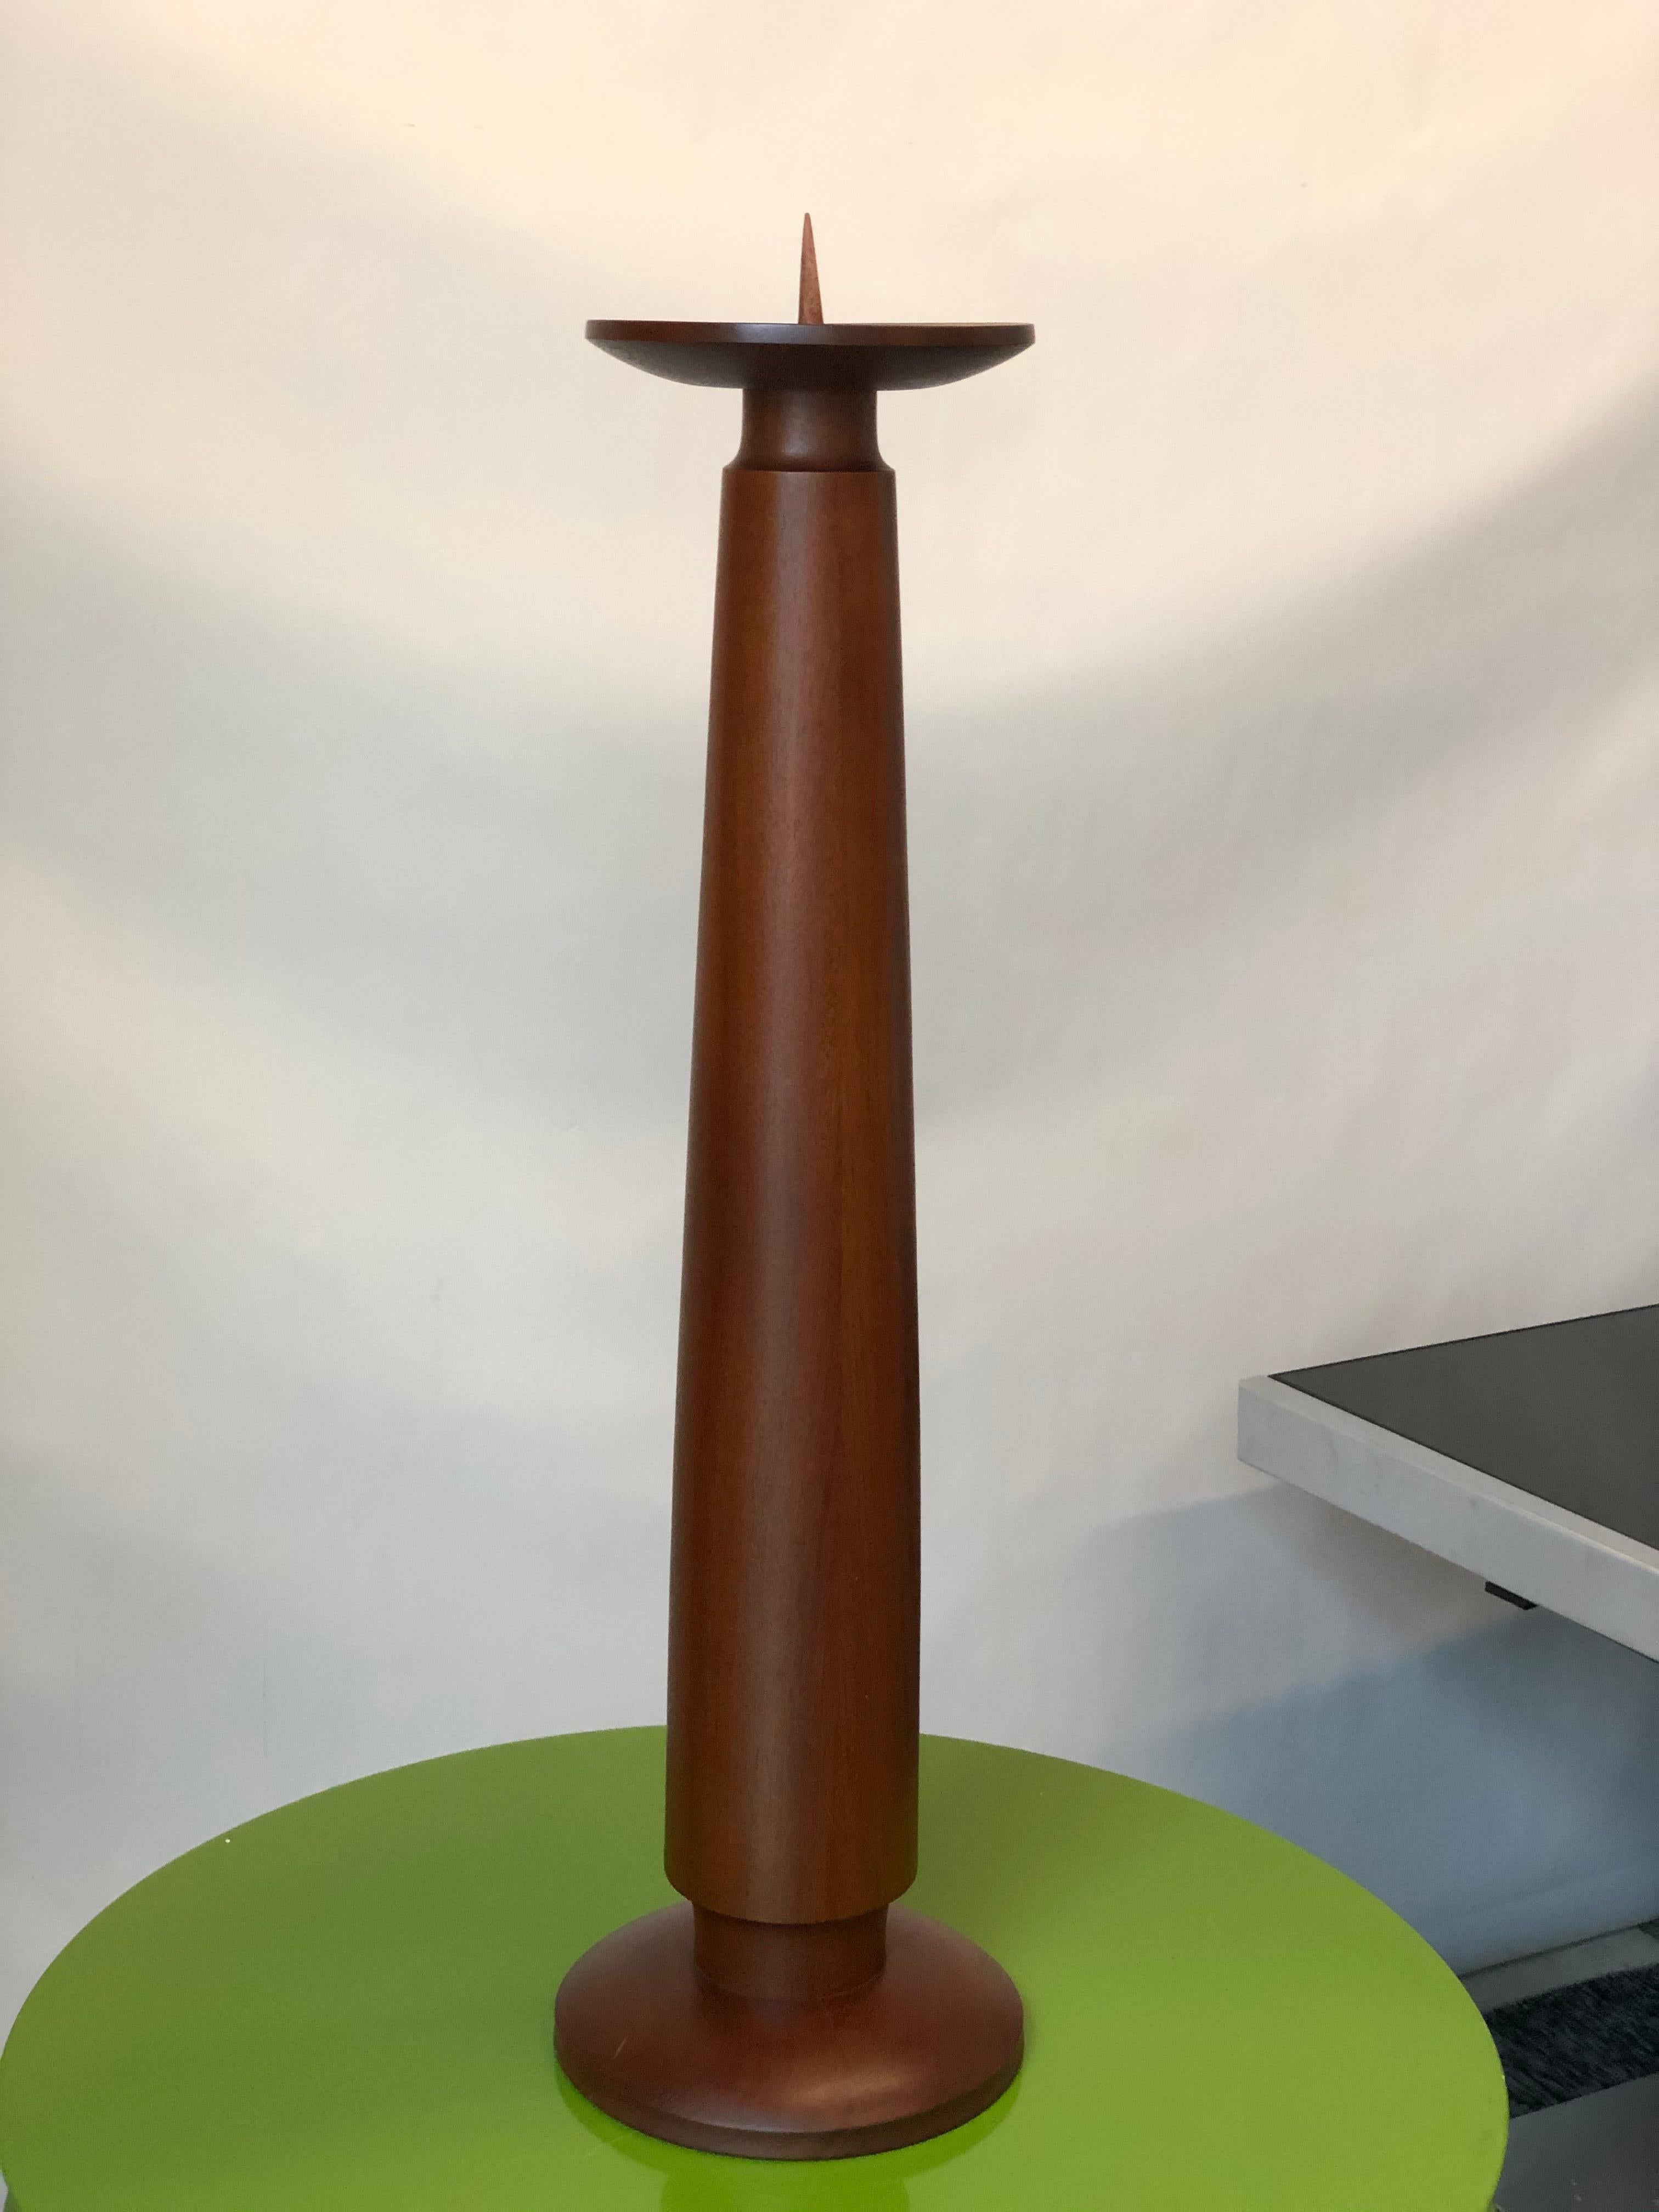 This substantial vintage Danish modern teak candle stand is in excellent condition overall. Unknown maker.
circa 1960s. Denmark.
Dimensions:
10.5